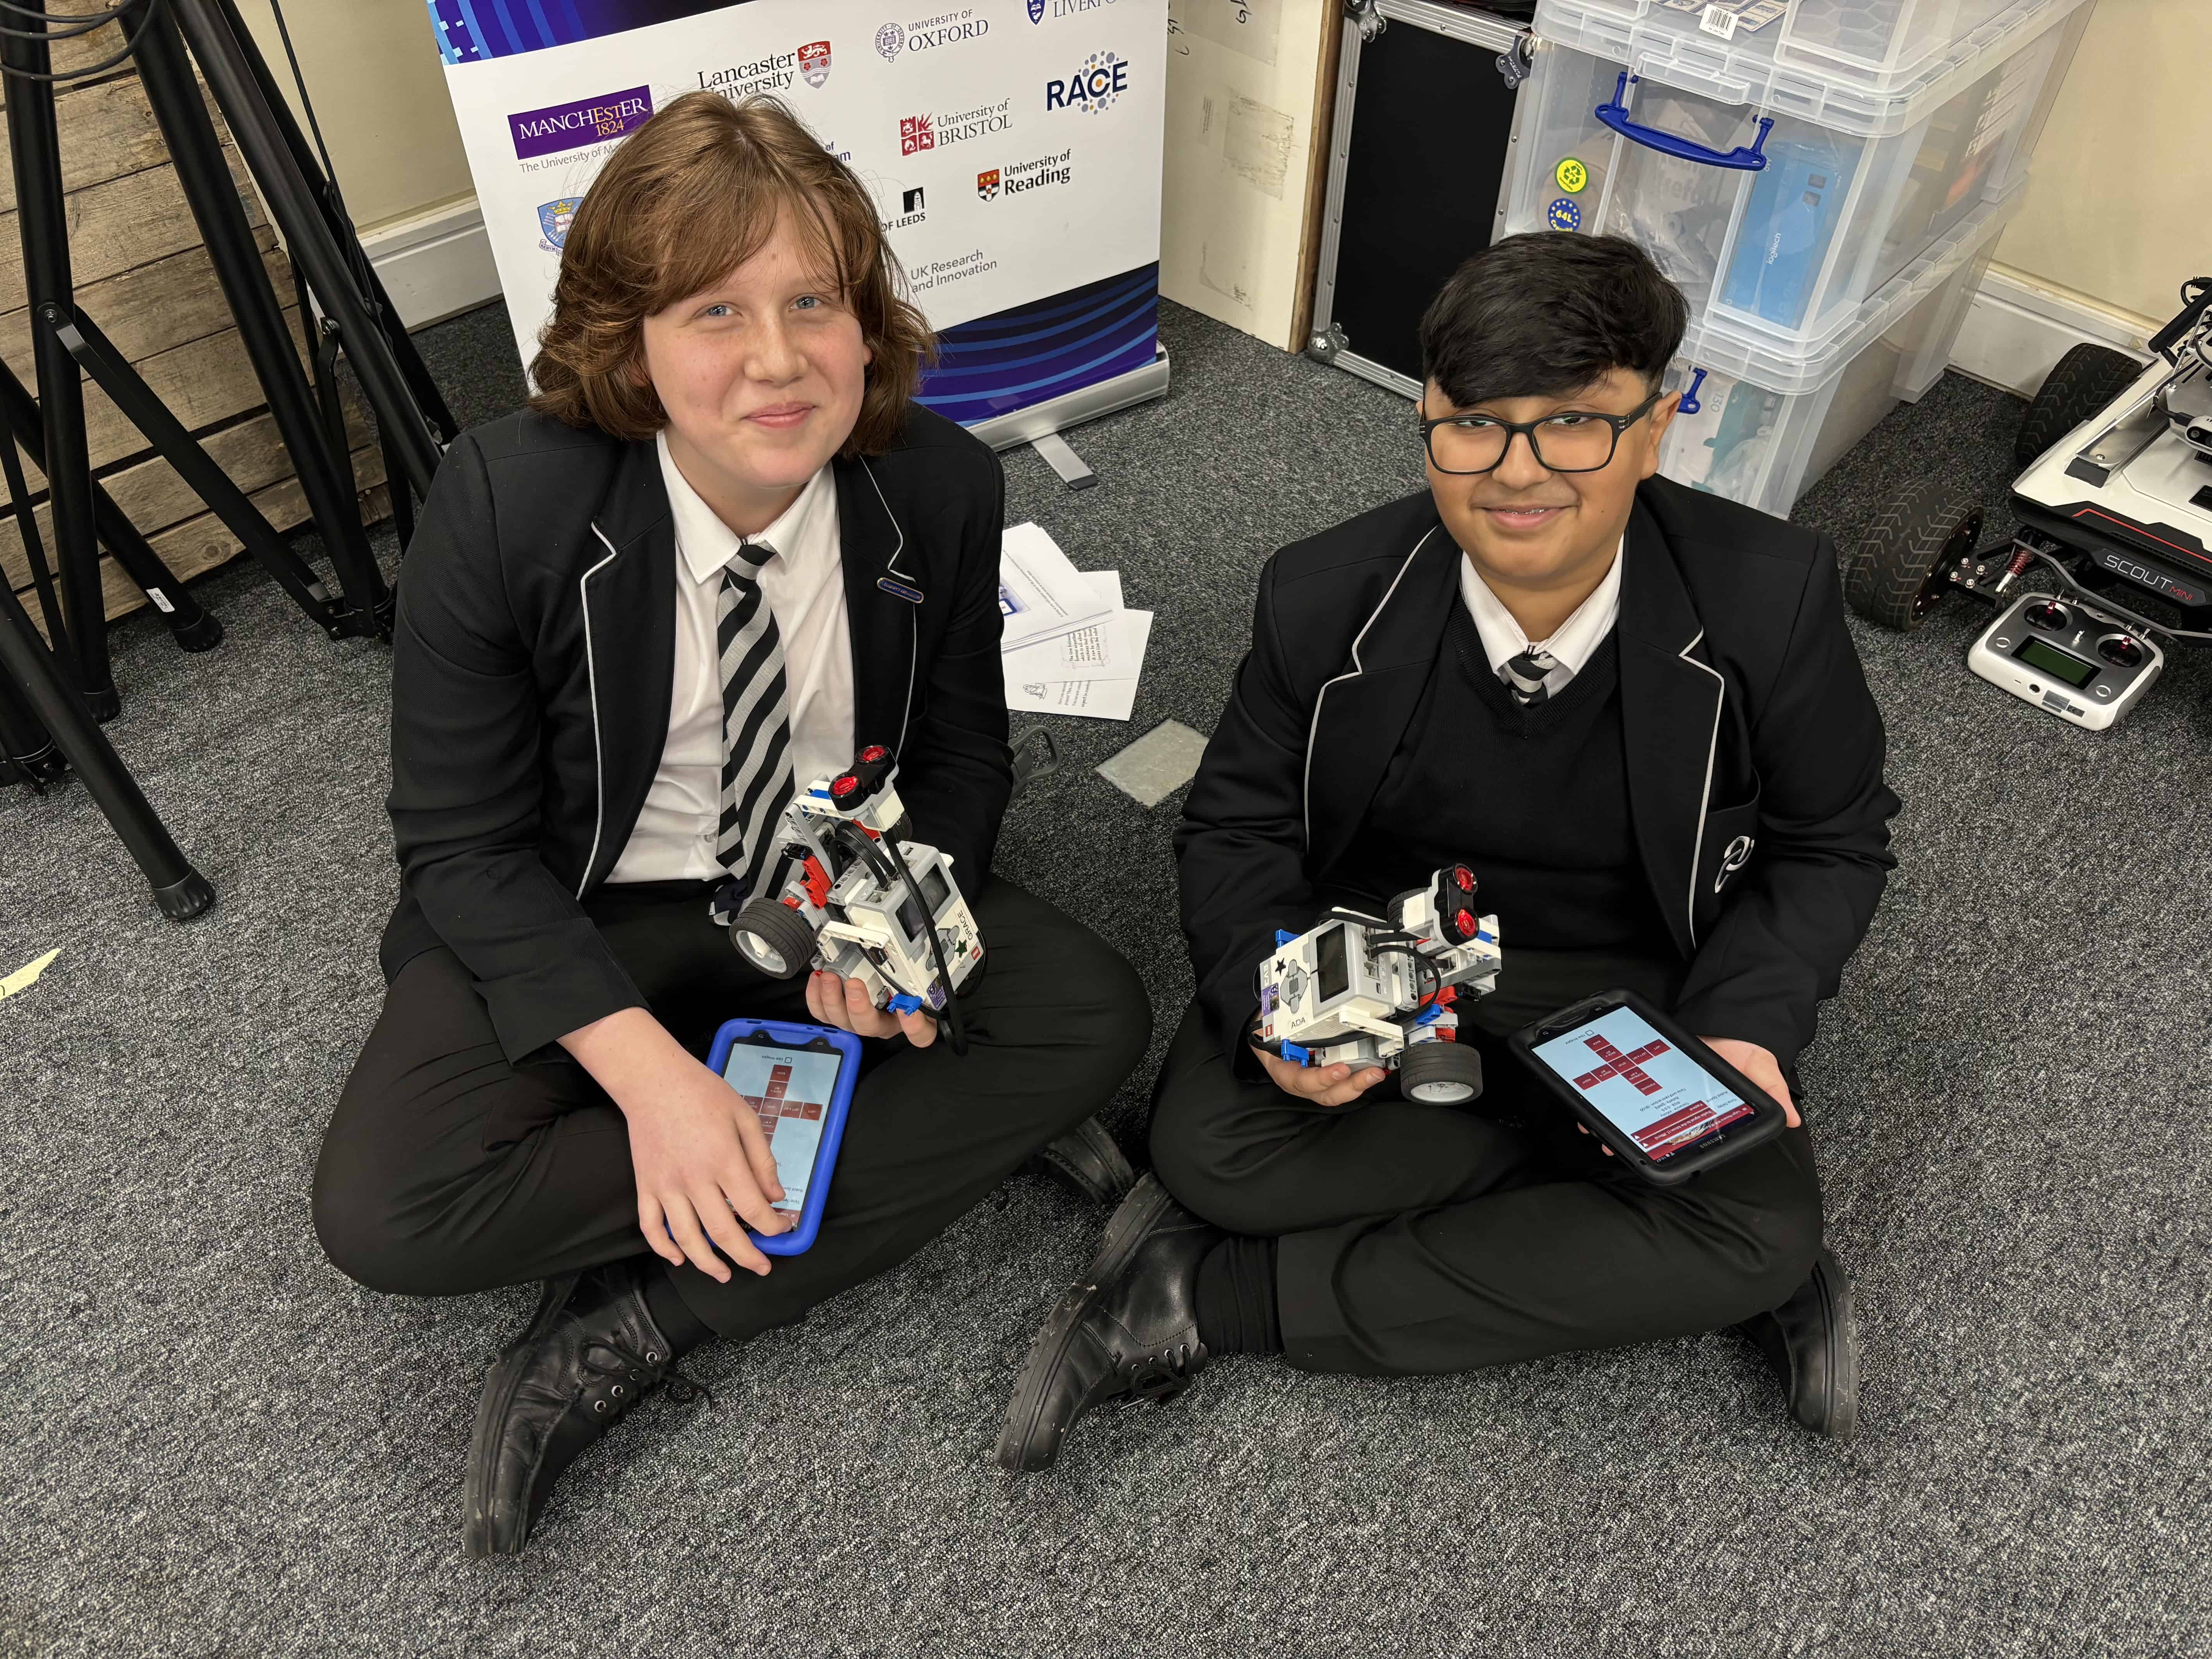 Two students from Laurus Ryecroft hold their Lego Rovers at the University of Manchester Computer Science department.